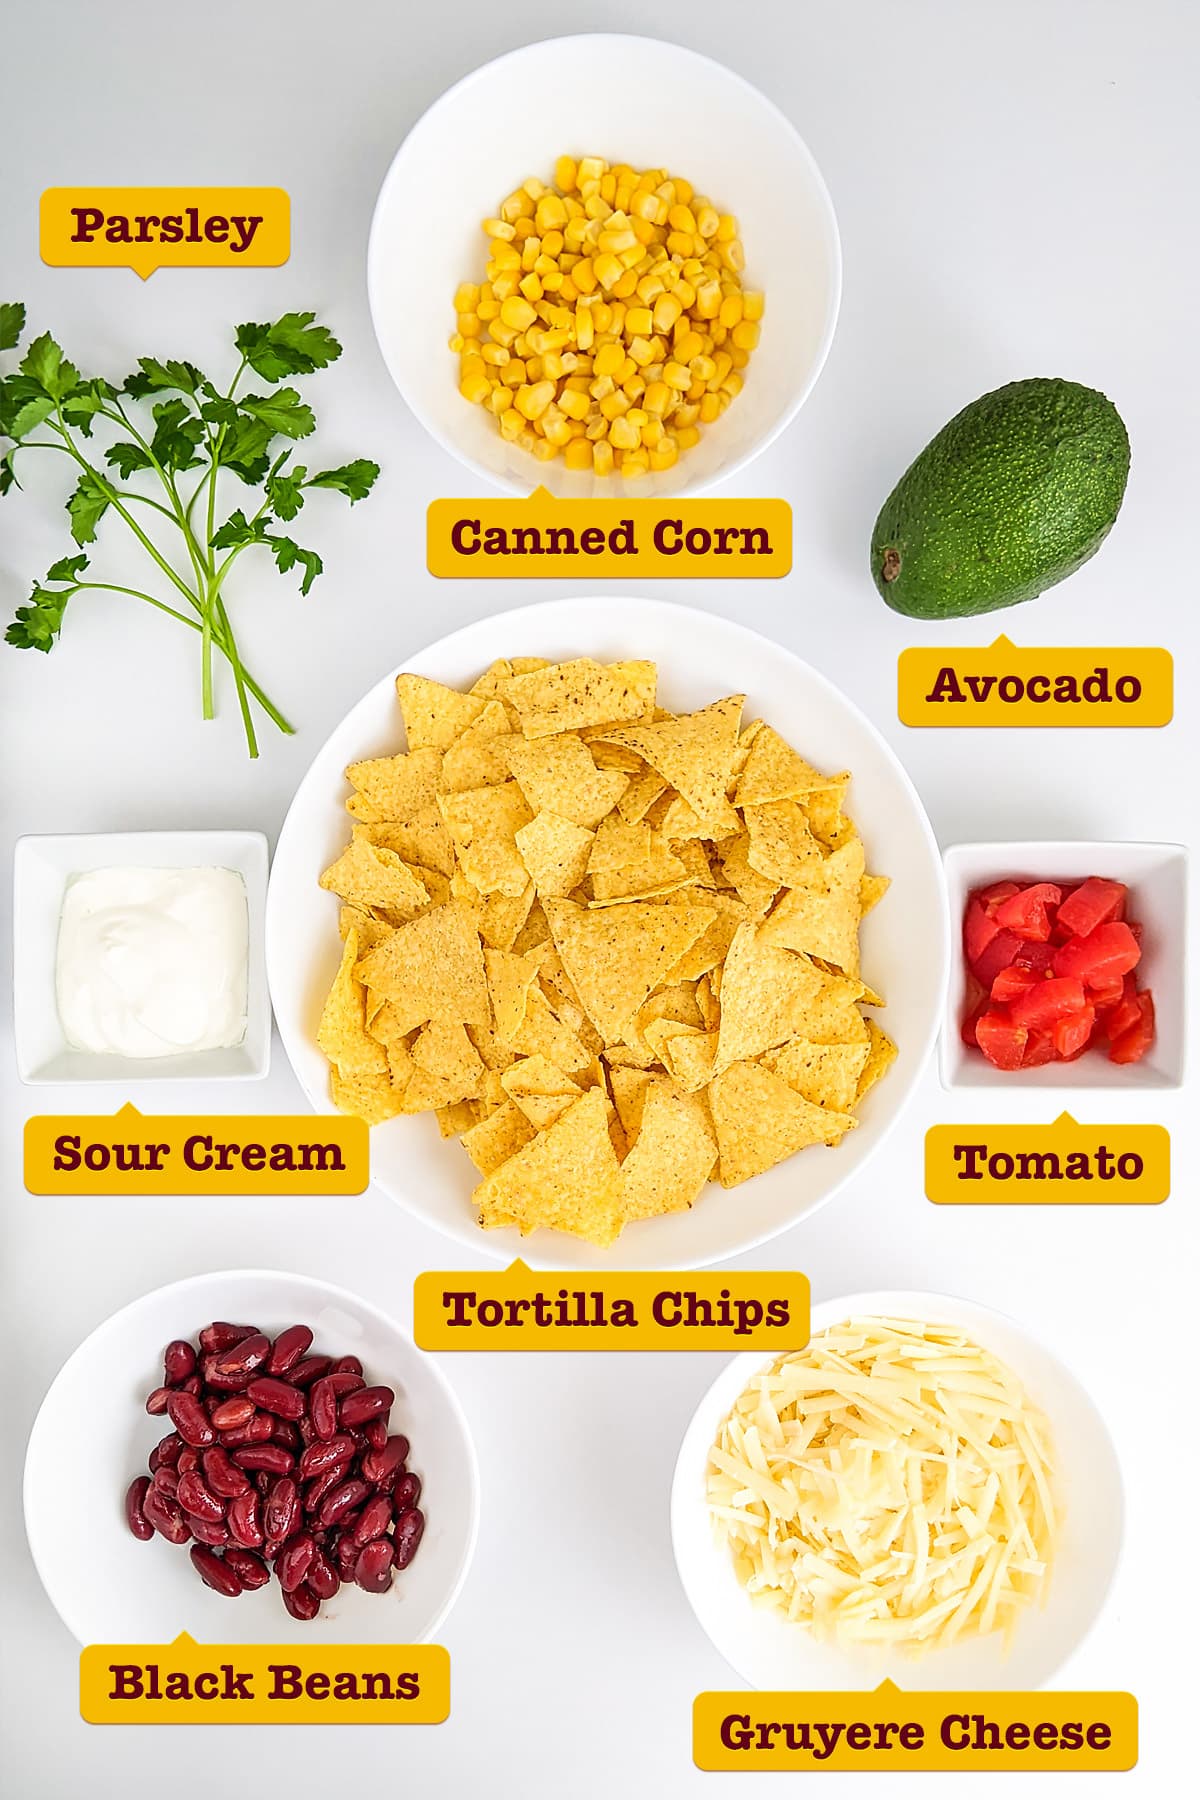 Tortilla chips with cheese, tomatoes, canned black beans, avocado, and corn on a white table.